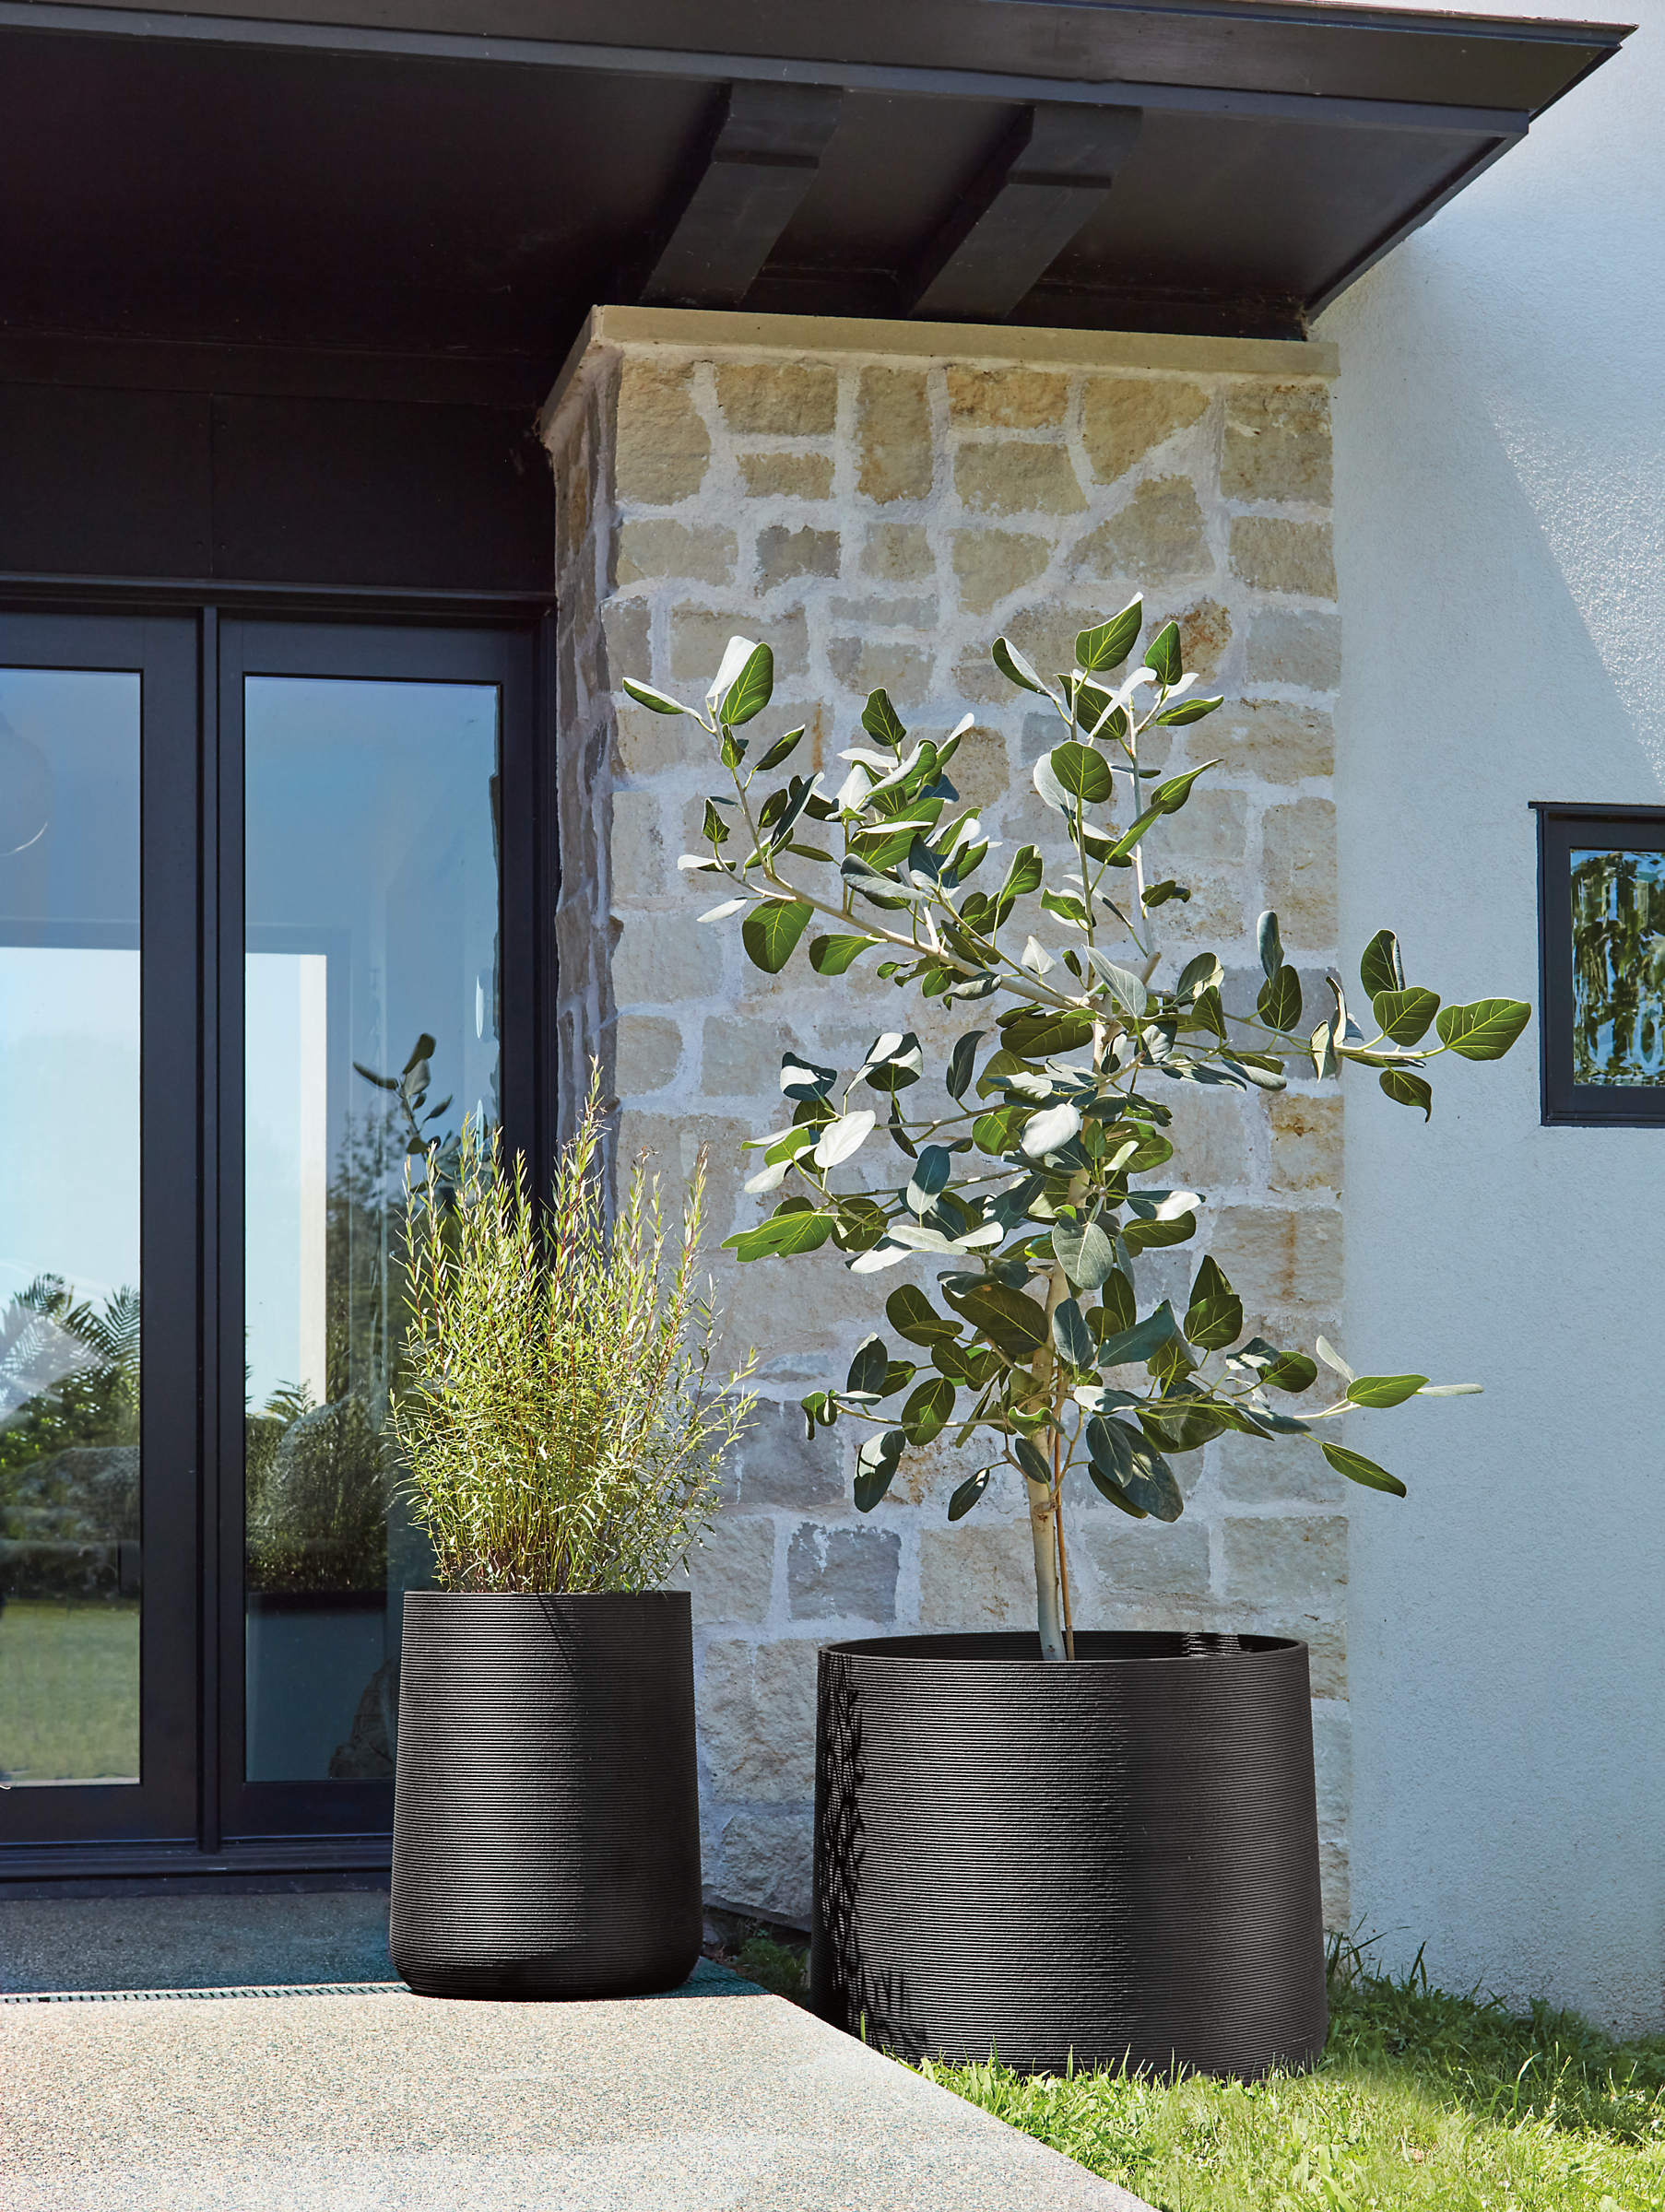 One 18-round and one 30-round Ajax planters in black on porch.